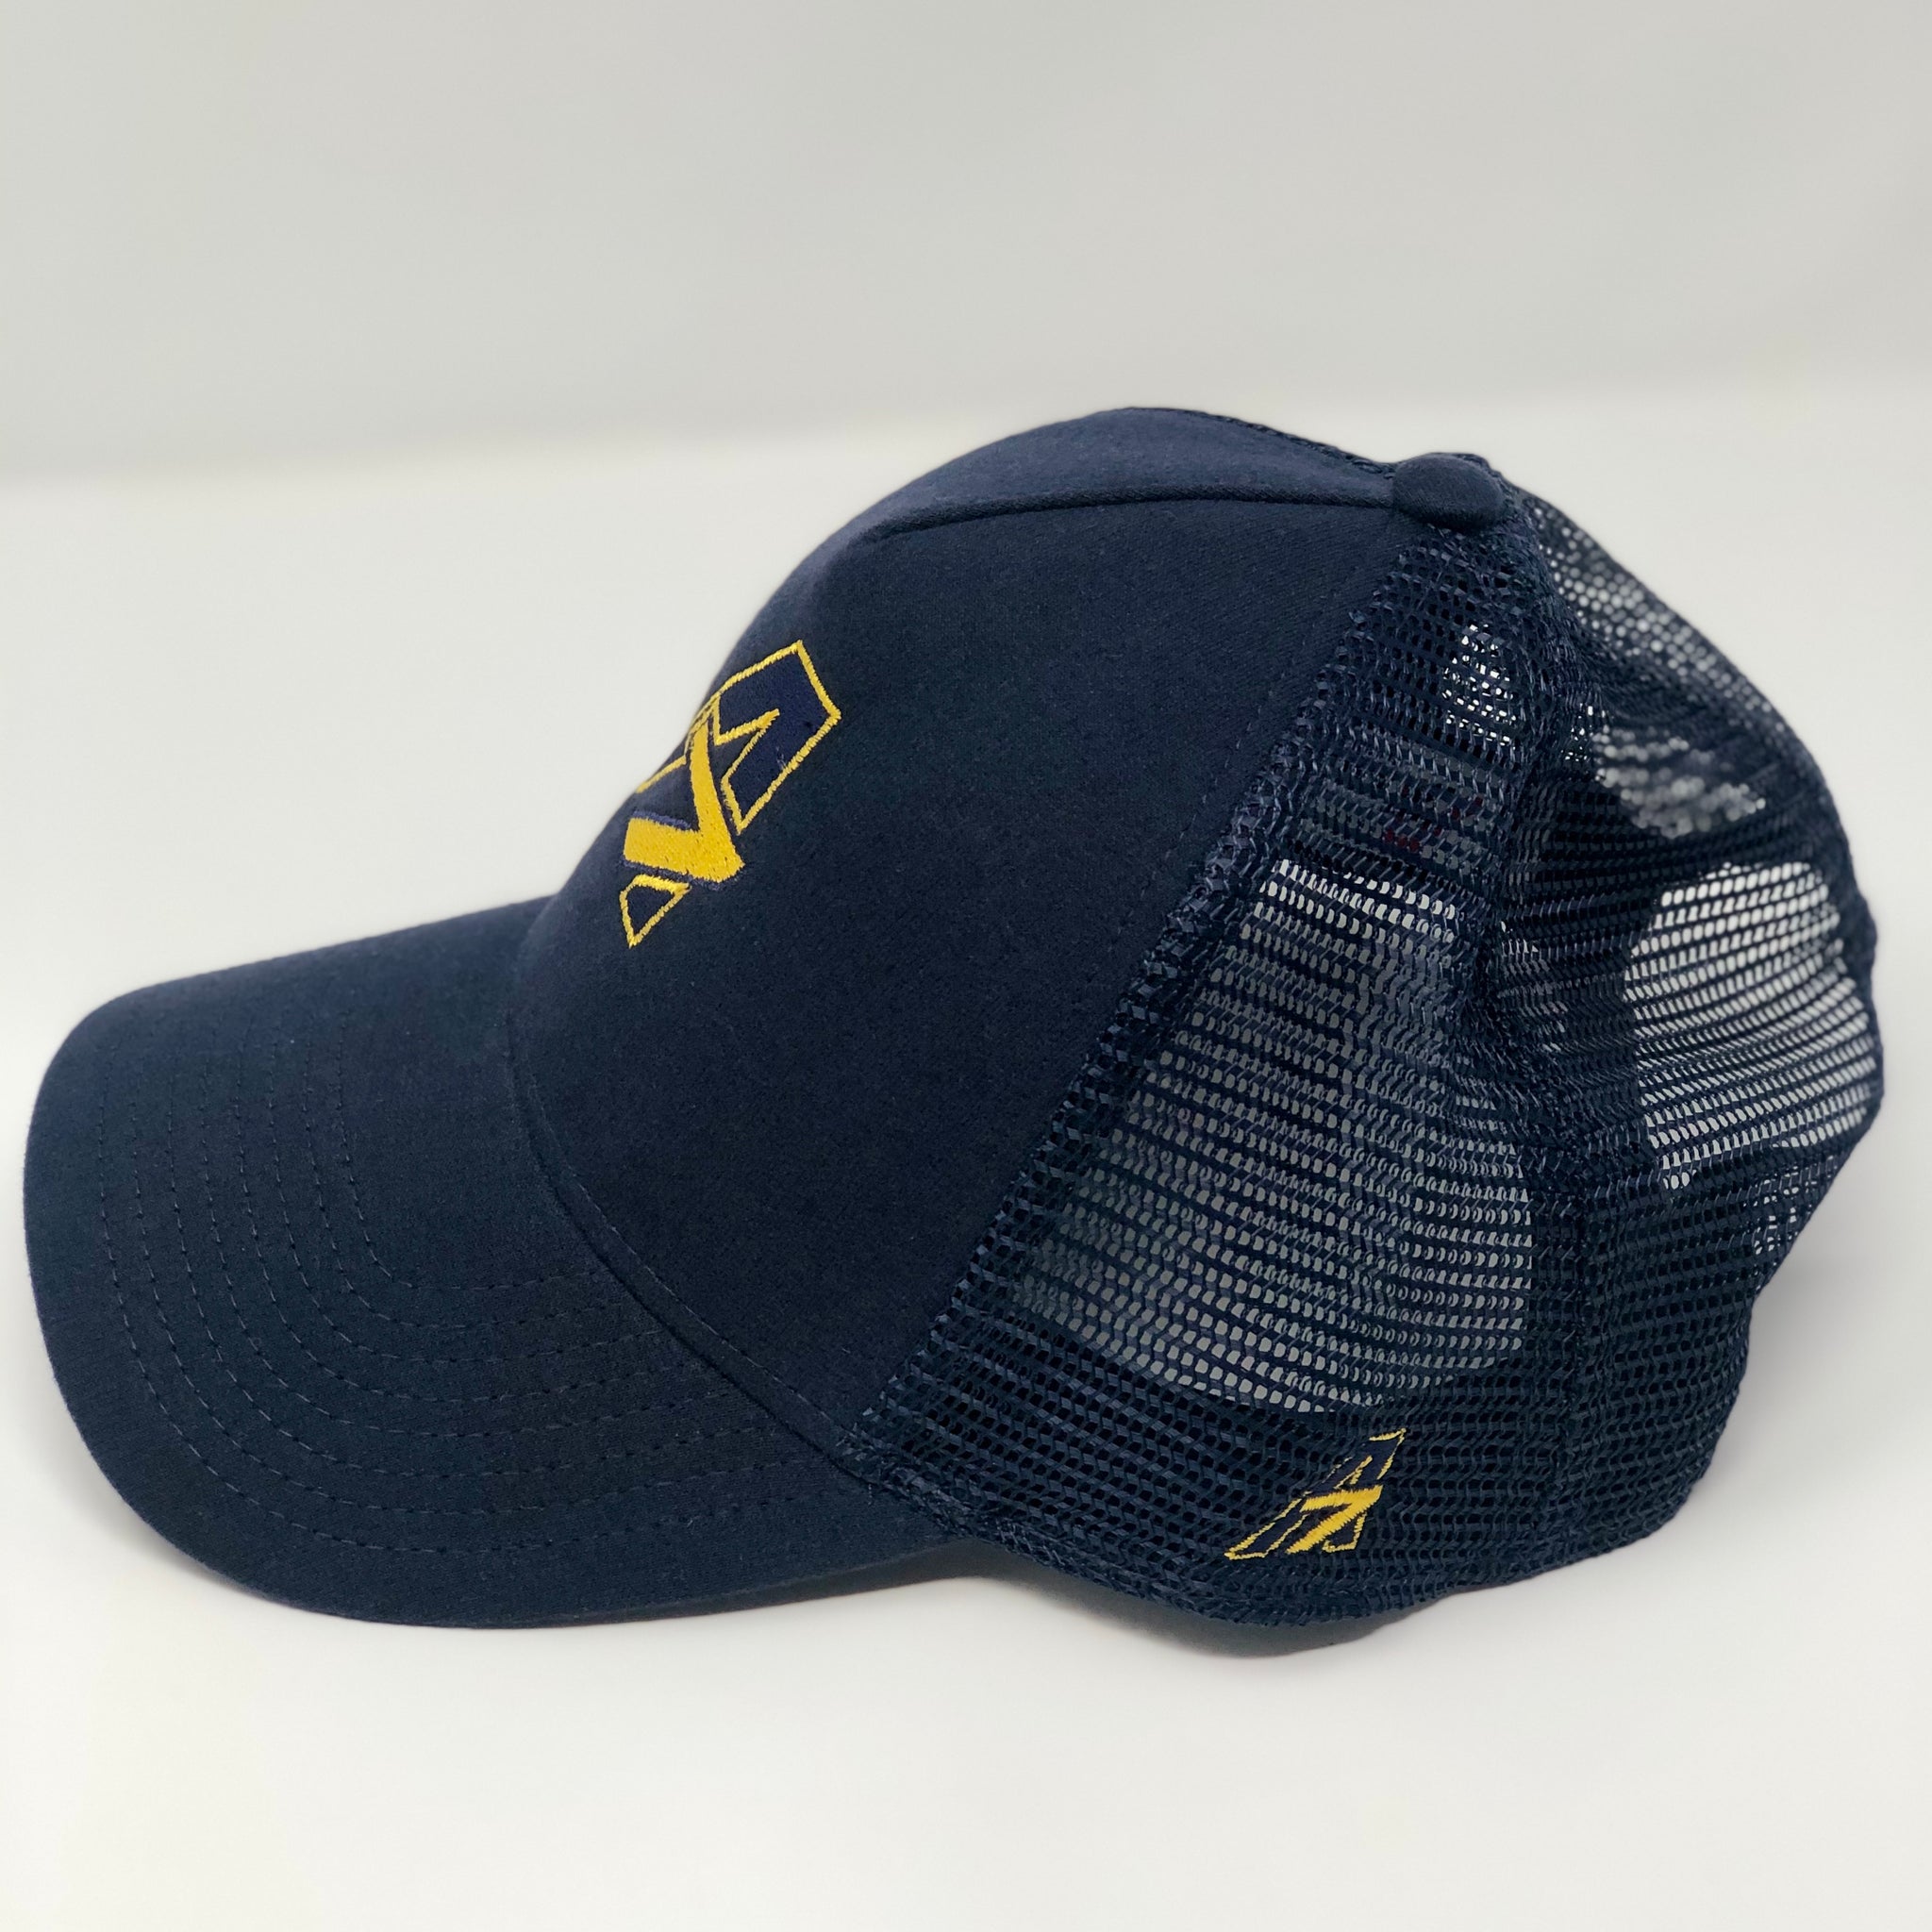 A7 Asher Navy Trucker hat, with Yellow embroidered  A7 logo